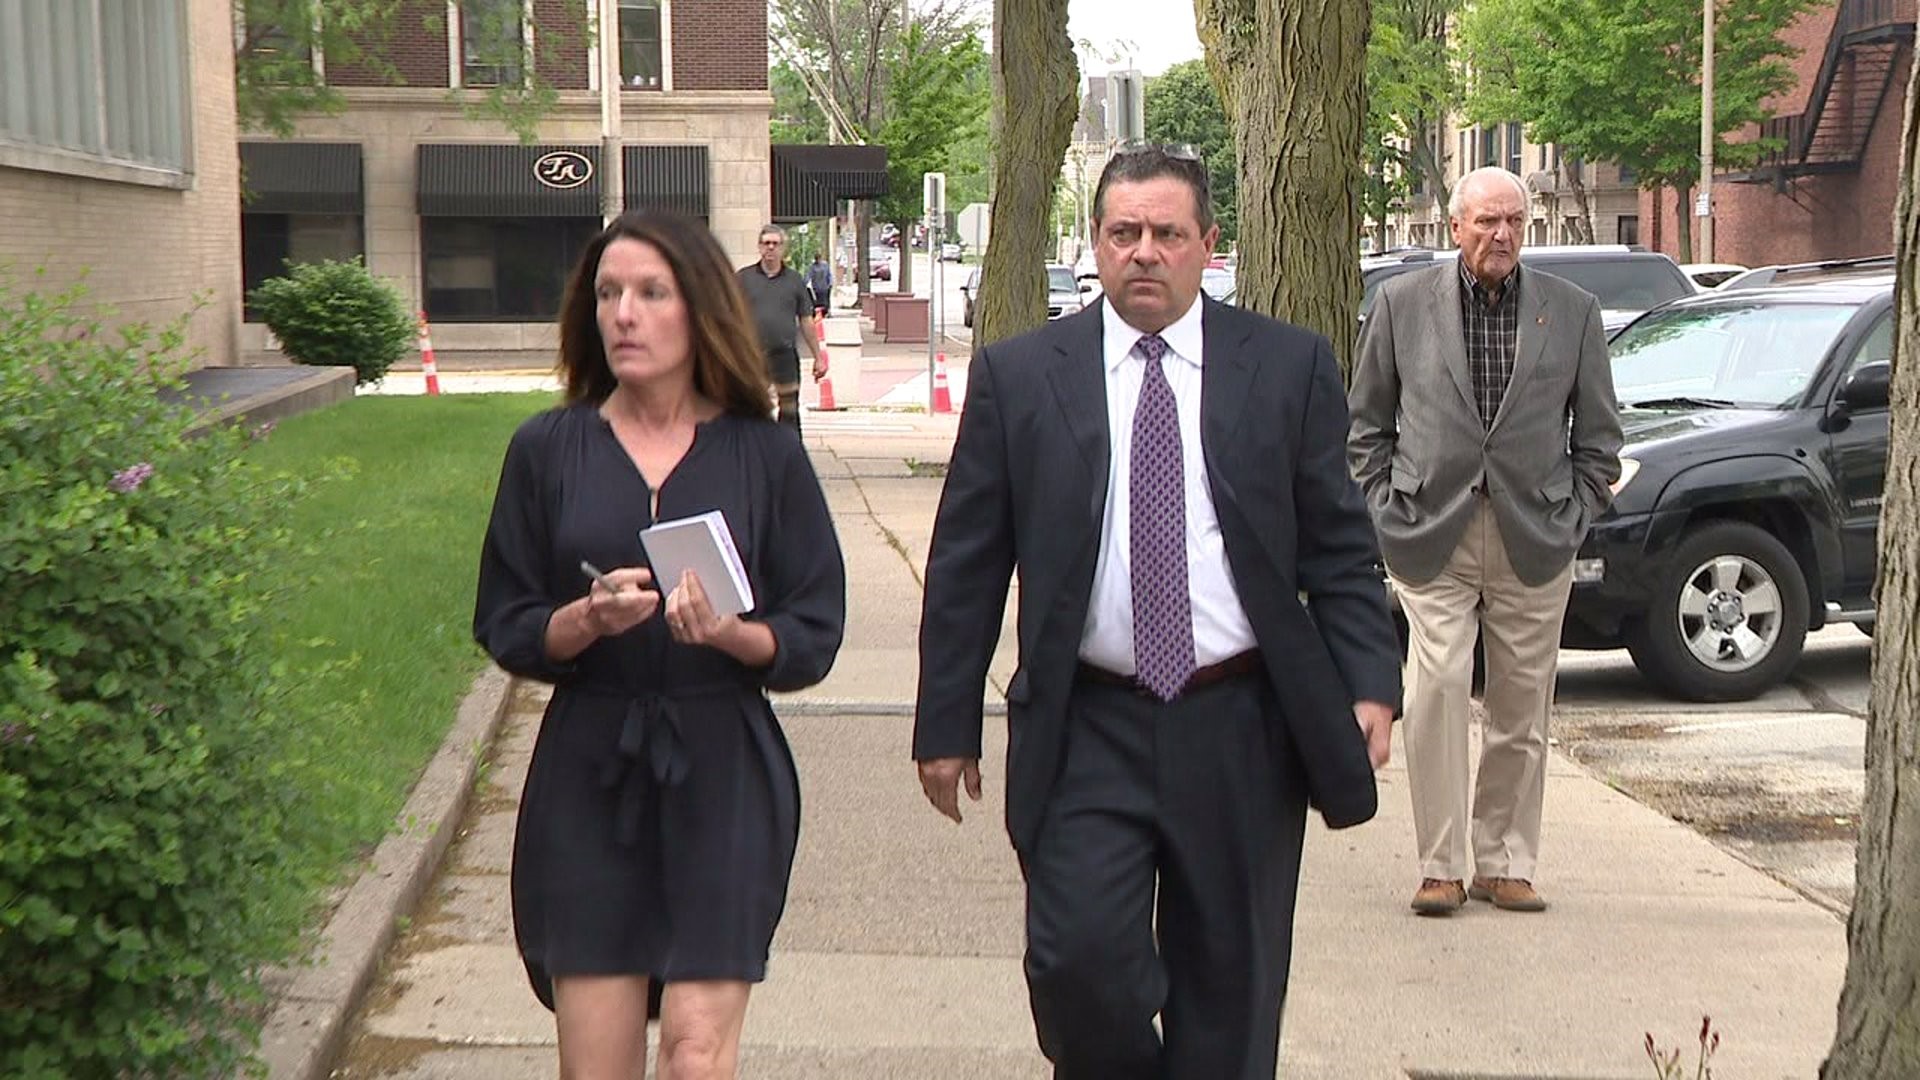 Raufeisen pleads guilty to federal charges